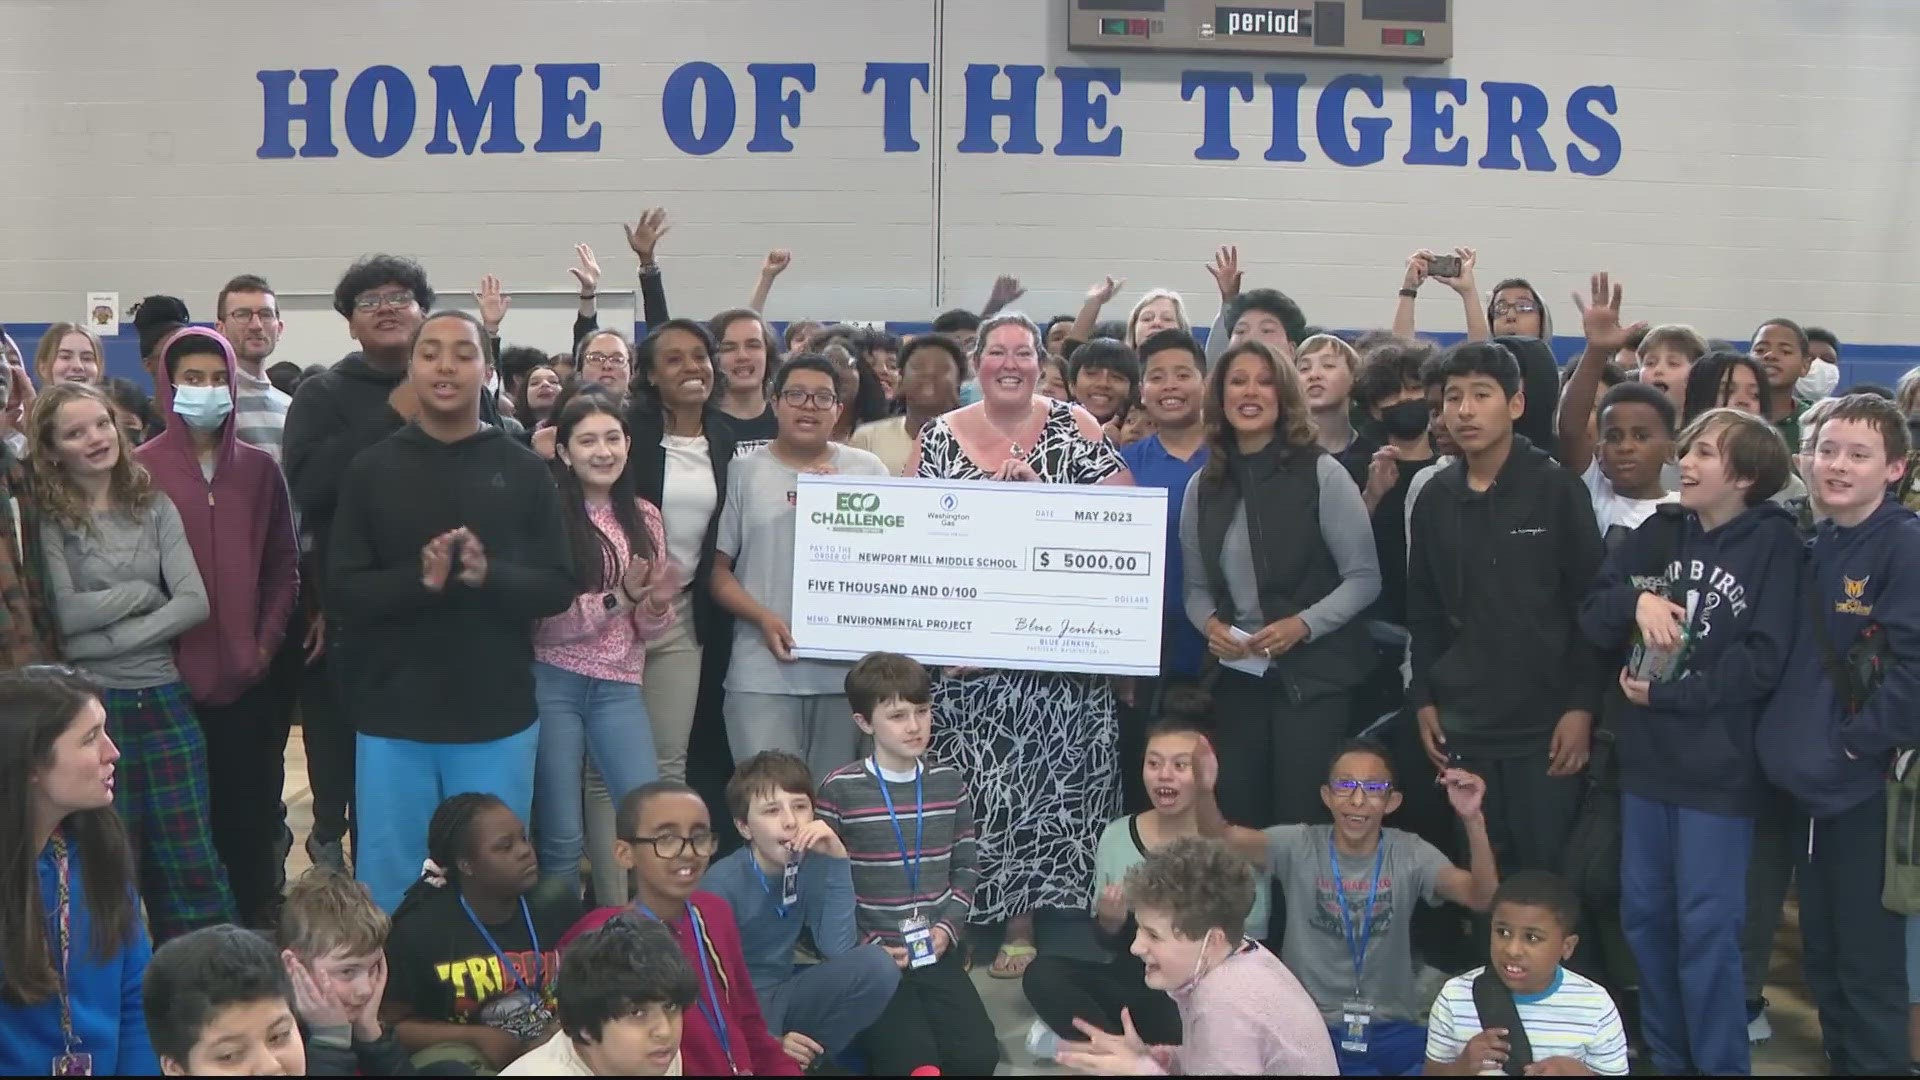 Congratulations to Newport Mill Middle School in Silver Spring, Maryland!